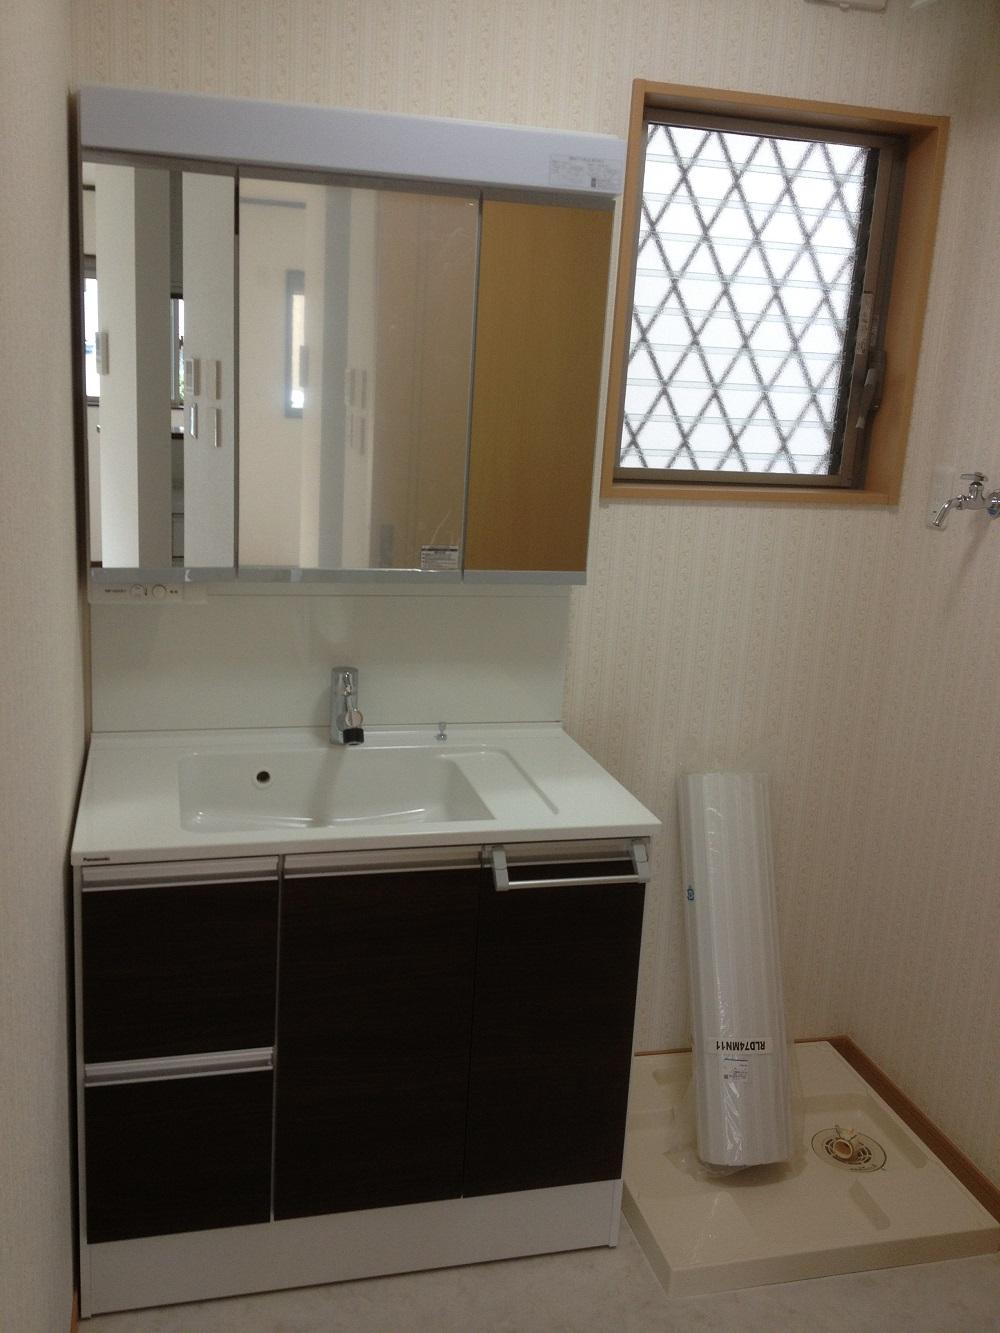 Wash basin, toilet. Three-sided mirror use. Storage portion is also rich